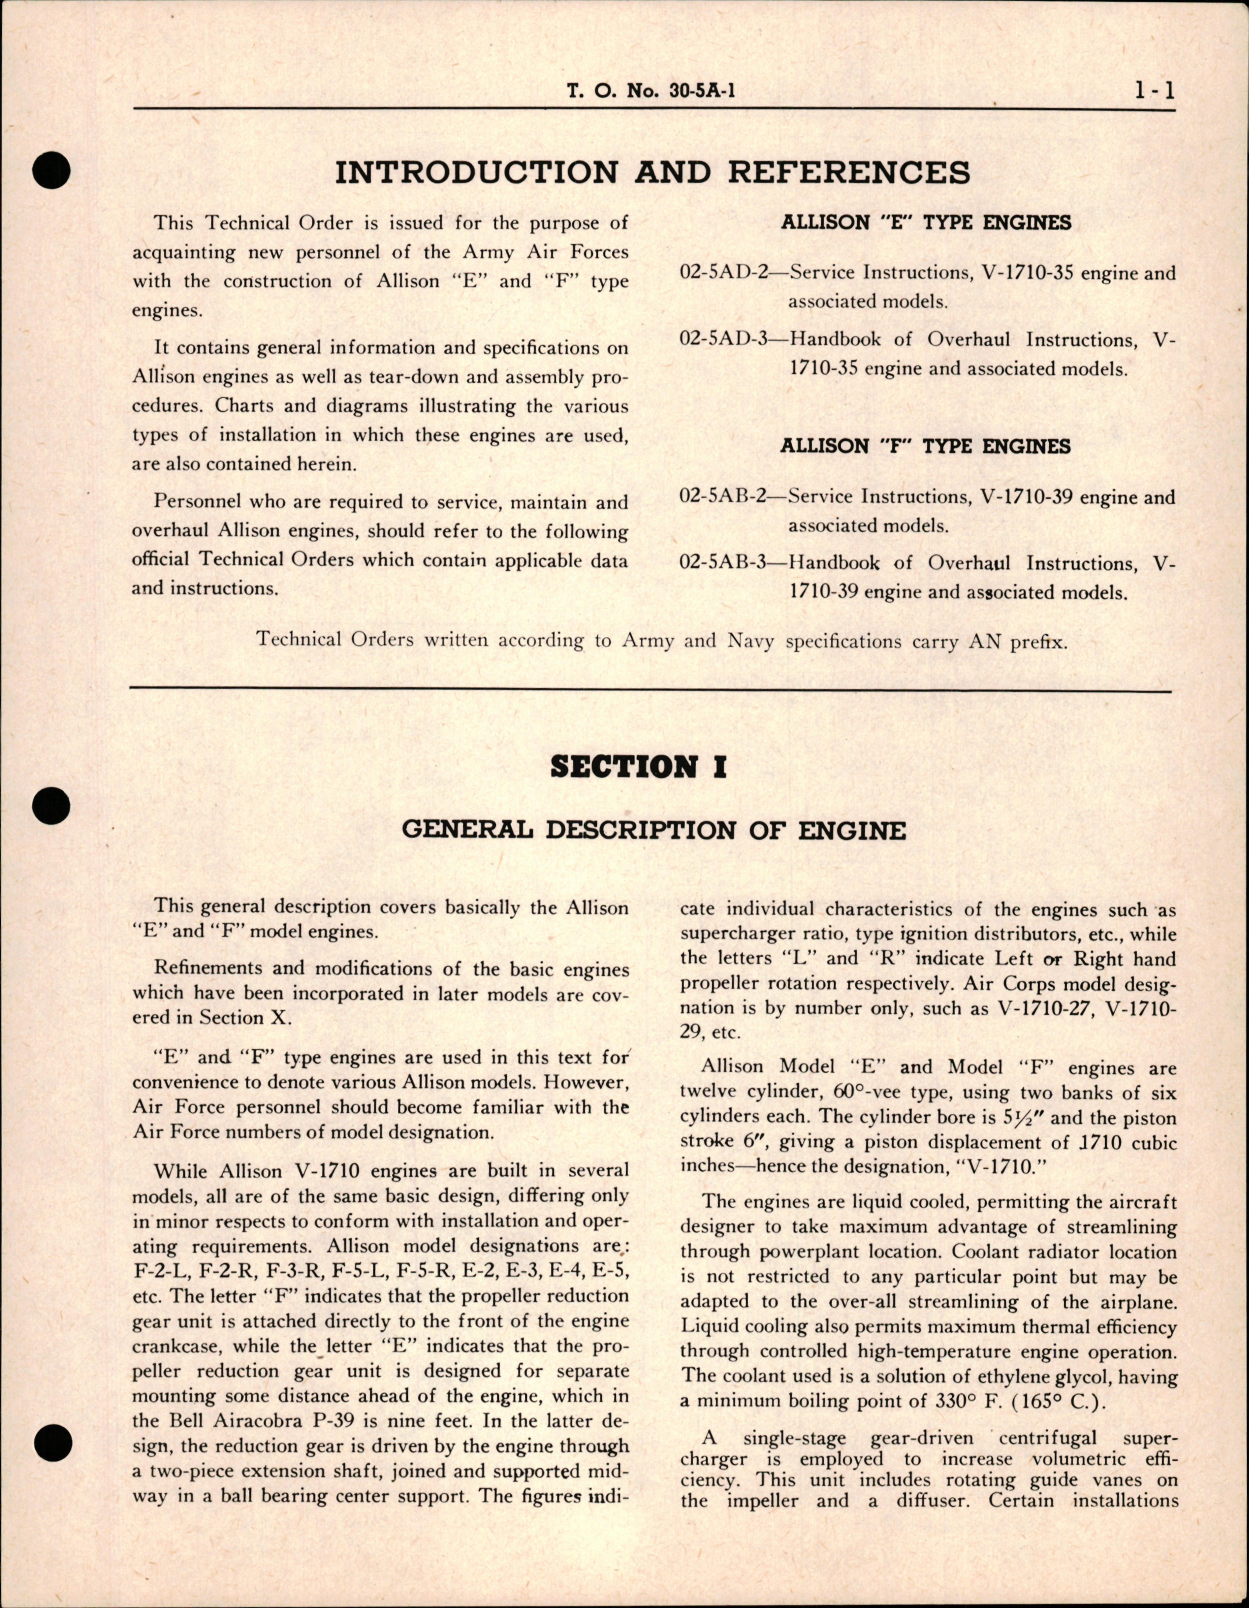 Sample page 7 from AirCorps Library document: Information Guide for Allison V-1710 Engines - Models E and F